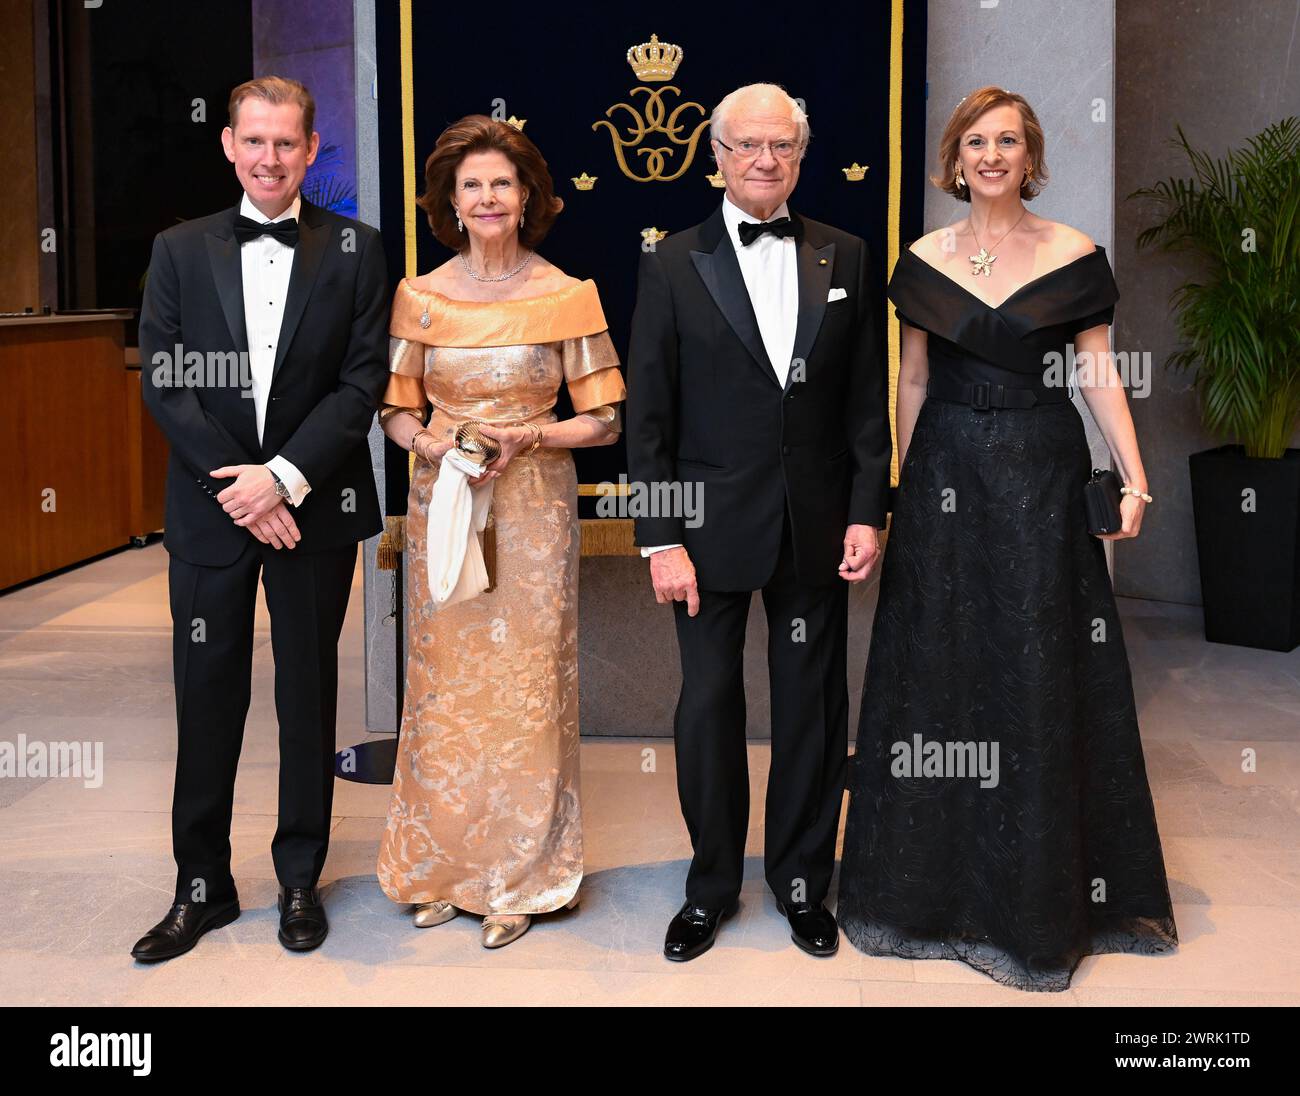 Mexico City, Mexico. 12th Mar, 2024. Sweden's Queen Silvia and King Carl XVI Gustaf pose together with the Swedish Amabassador Gunnar Aldén and his wife Sara Aldén at a dinner hosted by The King and Queen of Sweden at JW Marriott Hotel in Mexico City, Mexico, on March 12, 2024. The King and Queen of Sweden are on a three-day State Visit to Mexico on 12-14 March 2024.Photo: Jonas Ekströmer/TT/code 10030 Credit: TT News Agency/Alamy Live News Stock Photo